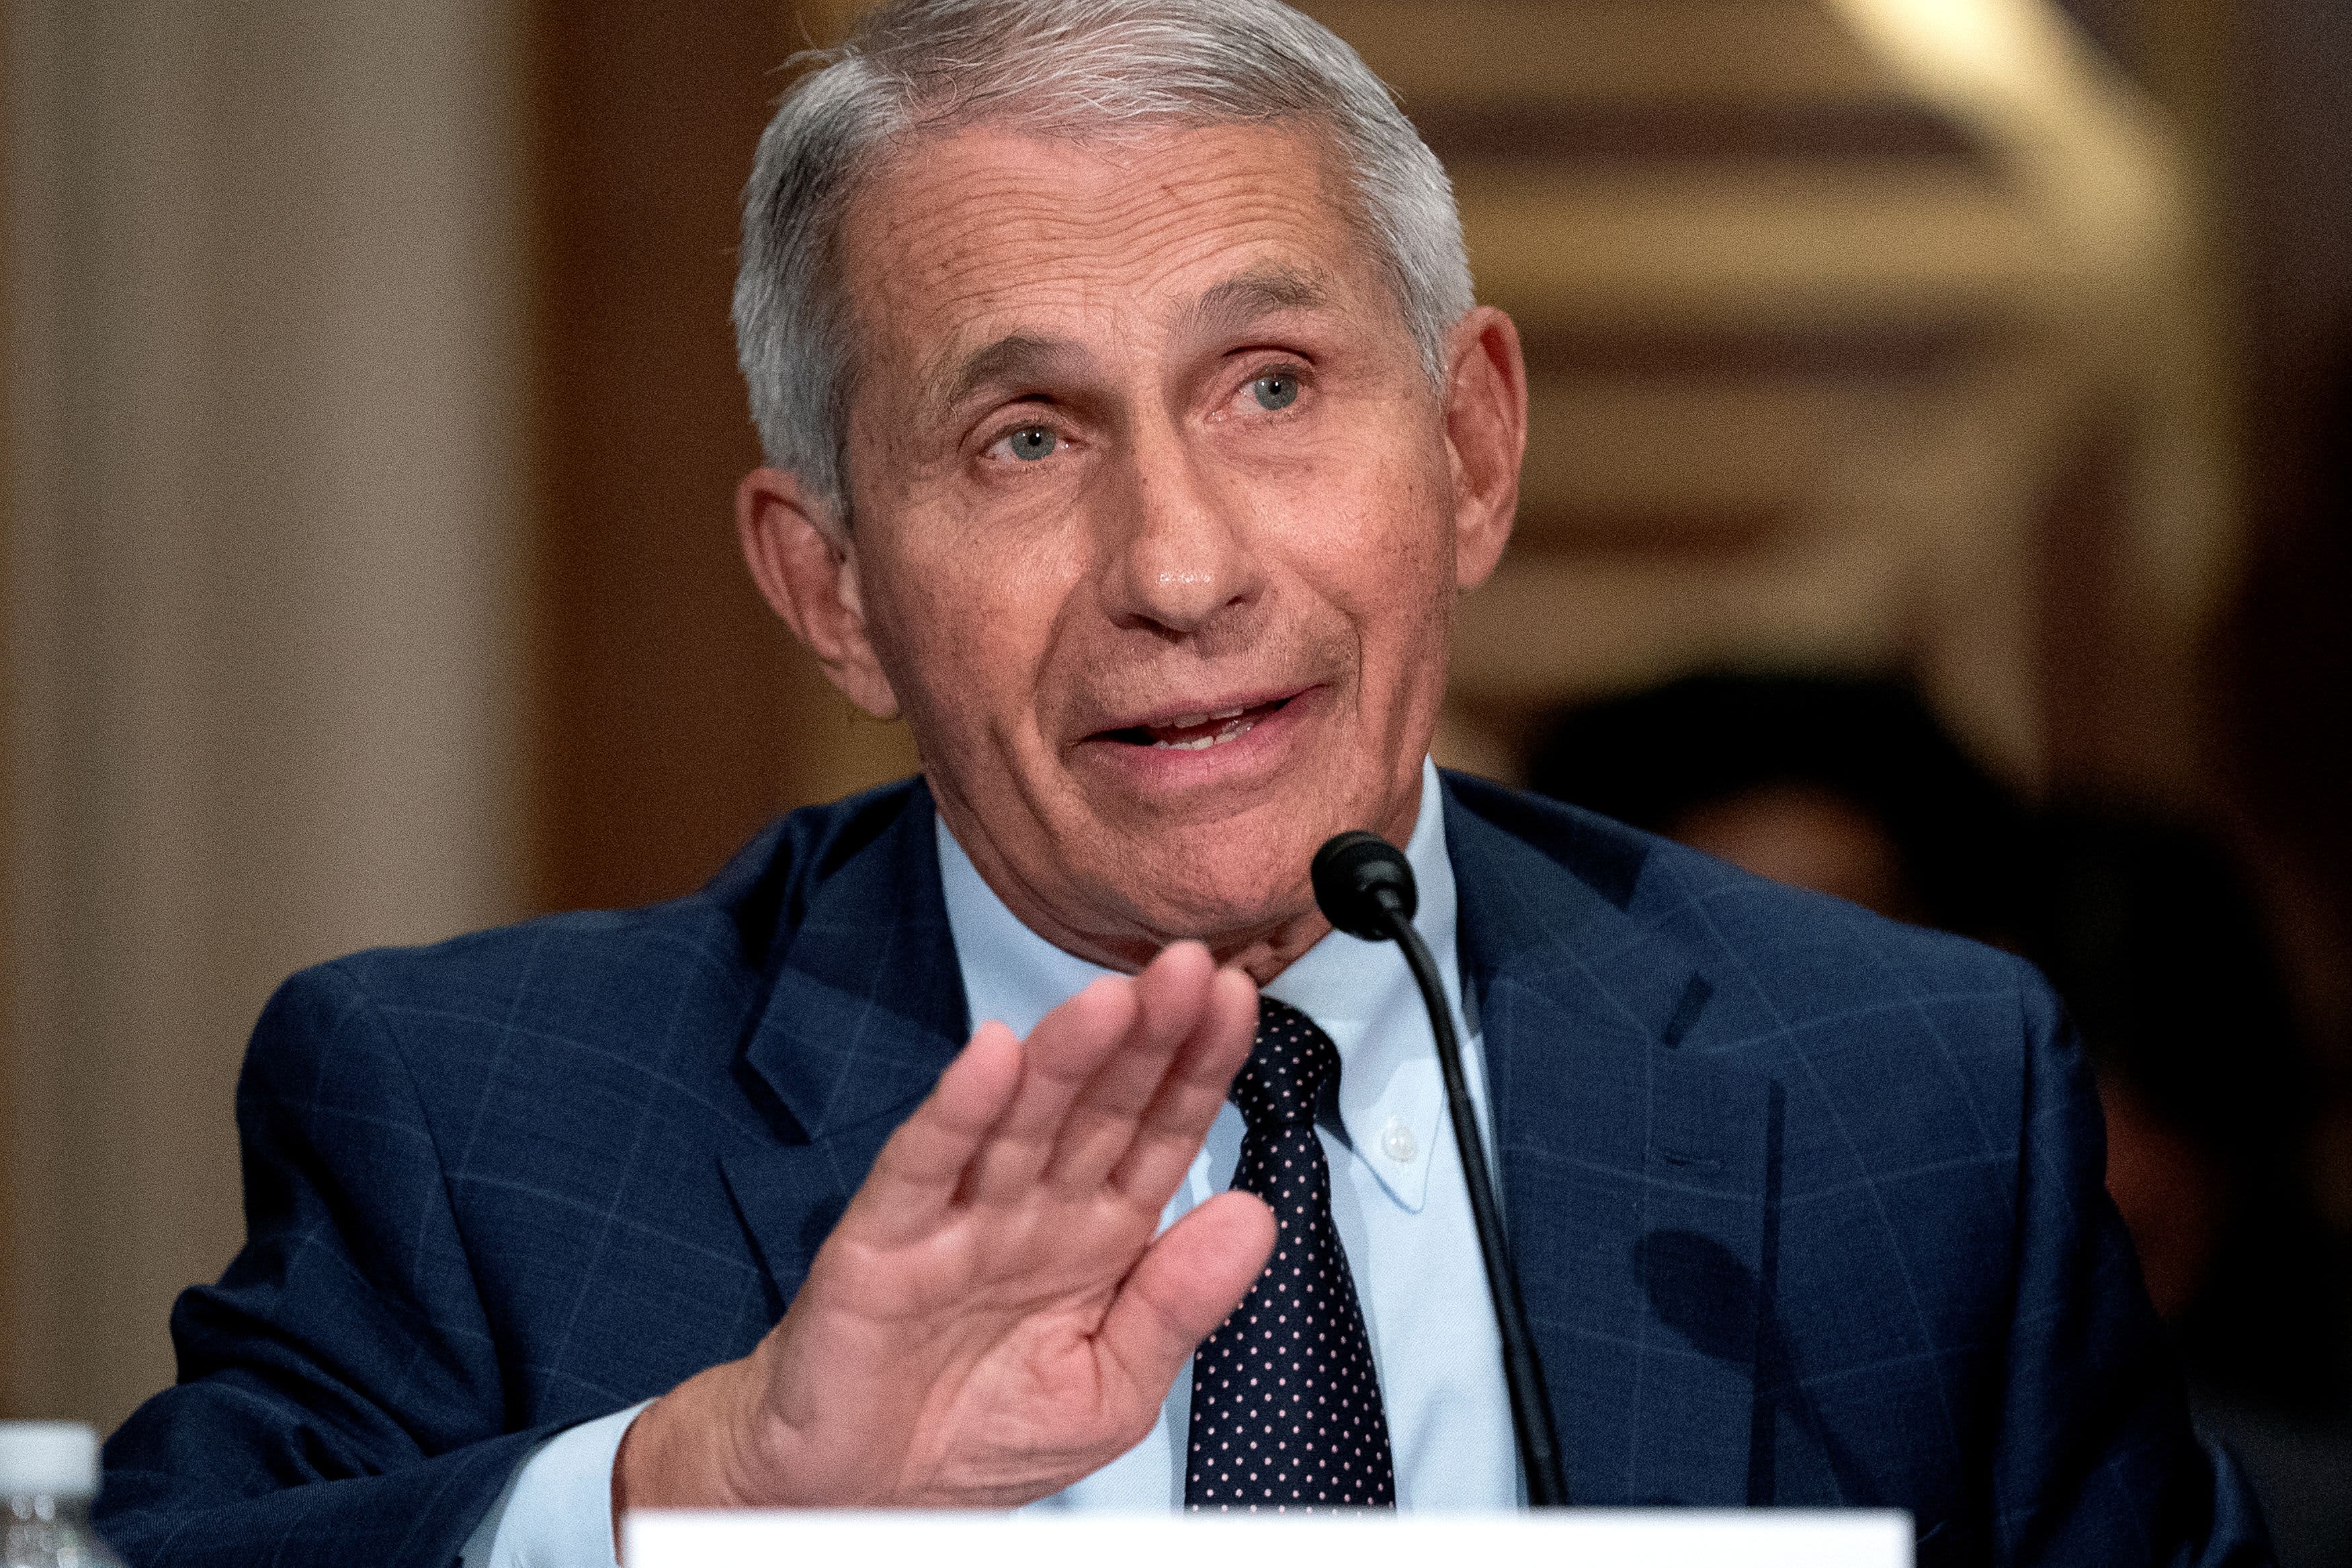 Fauci says he wouldn't be surprised if Covid vaccines require three shots for full regimen, instead of two